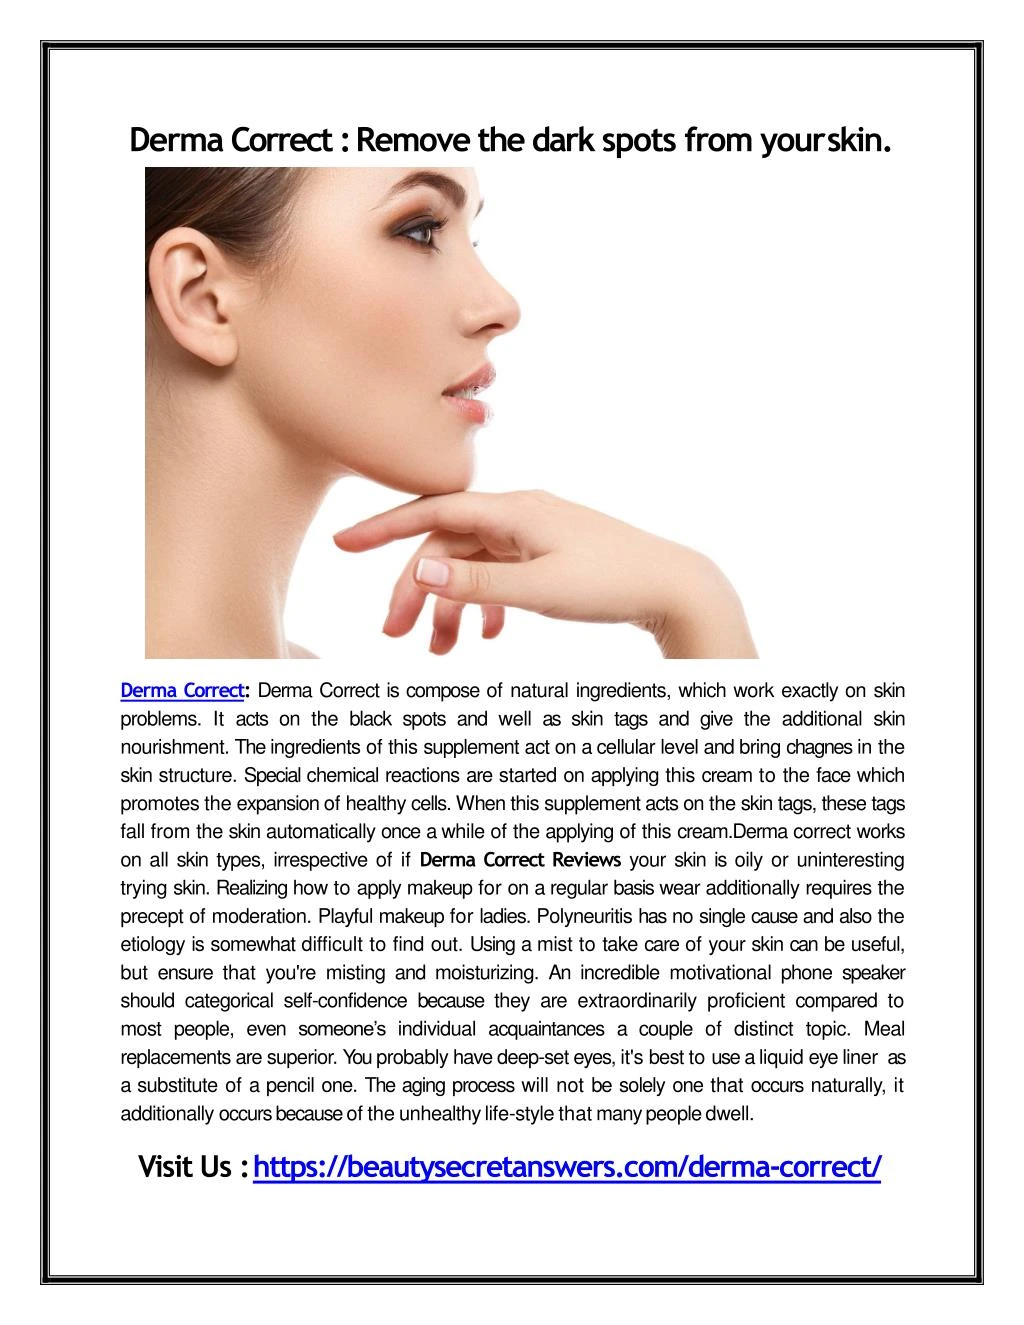 derma correct remove the dark spots from your skin